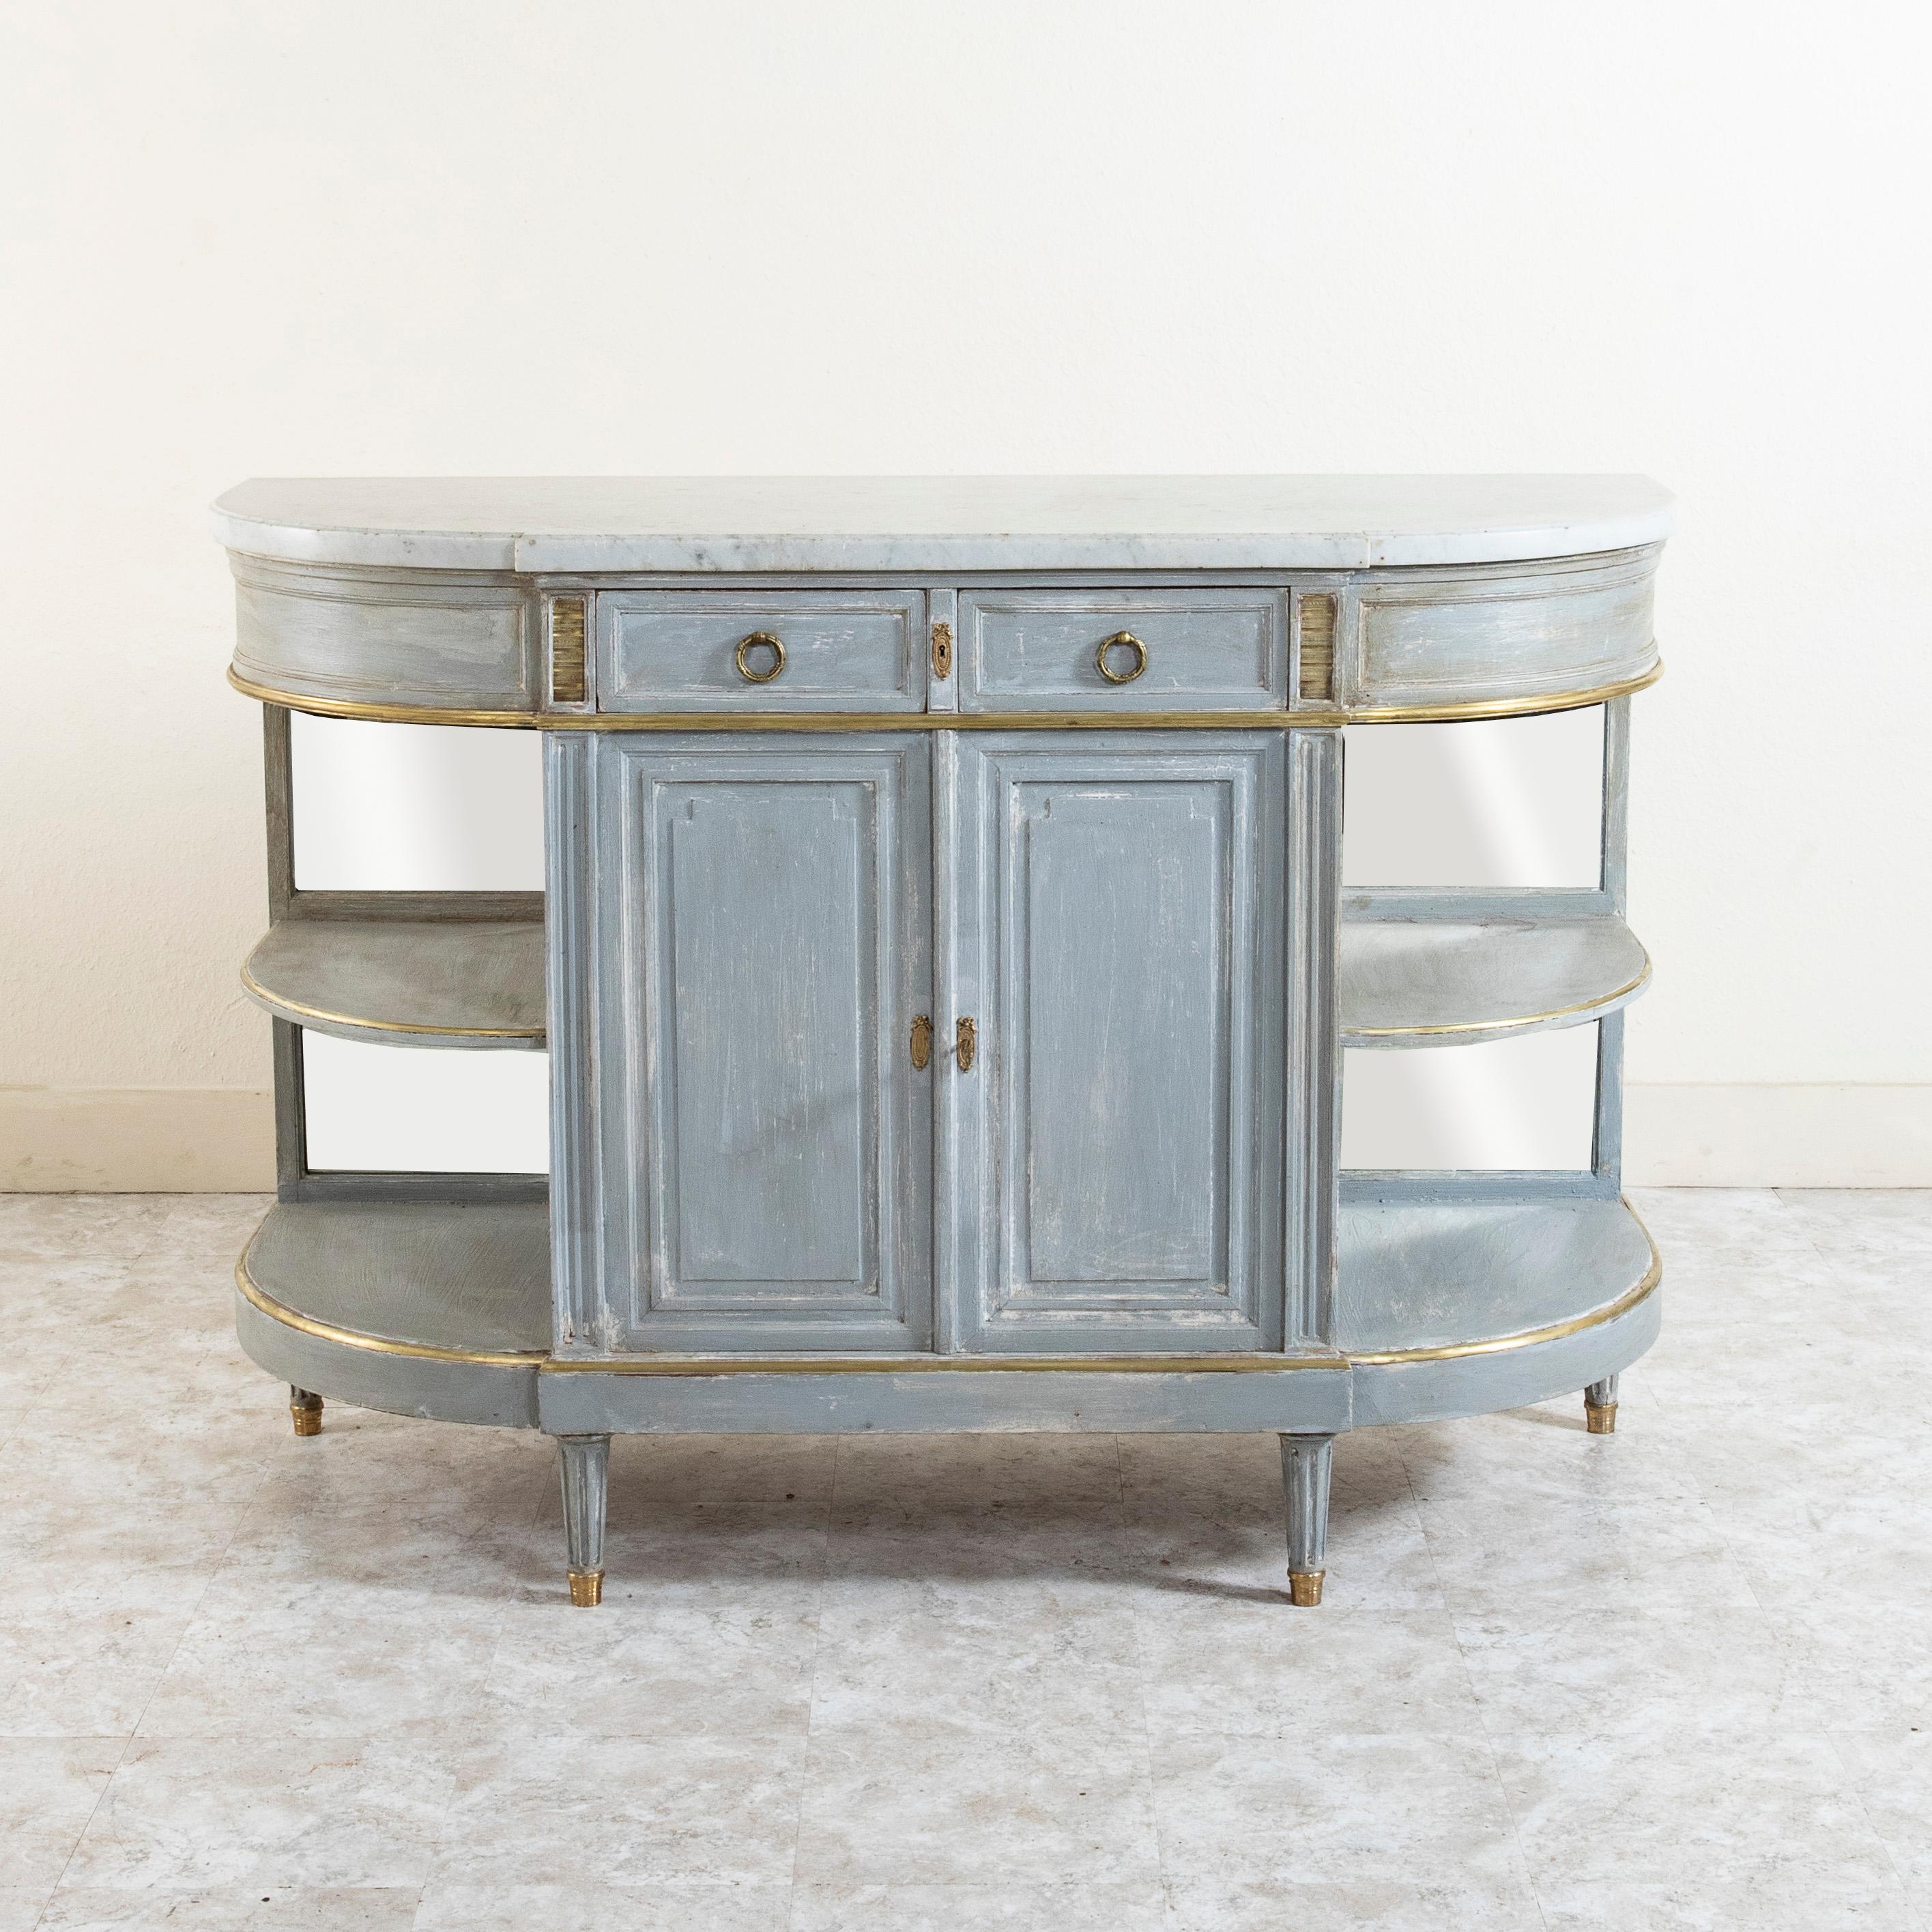 This late nineteenth century French Louis XVI style demi-lune enfilade, sideboard, or buffet features a beveled white marble top and bronze detailing. Painted in Marie Antoinette grey, this piece has two drawers of dovetail construction fitted with